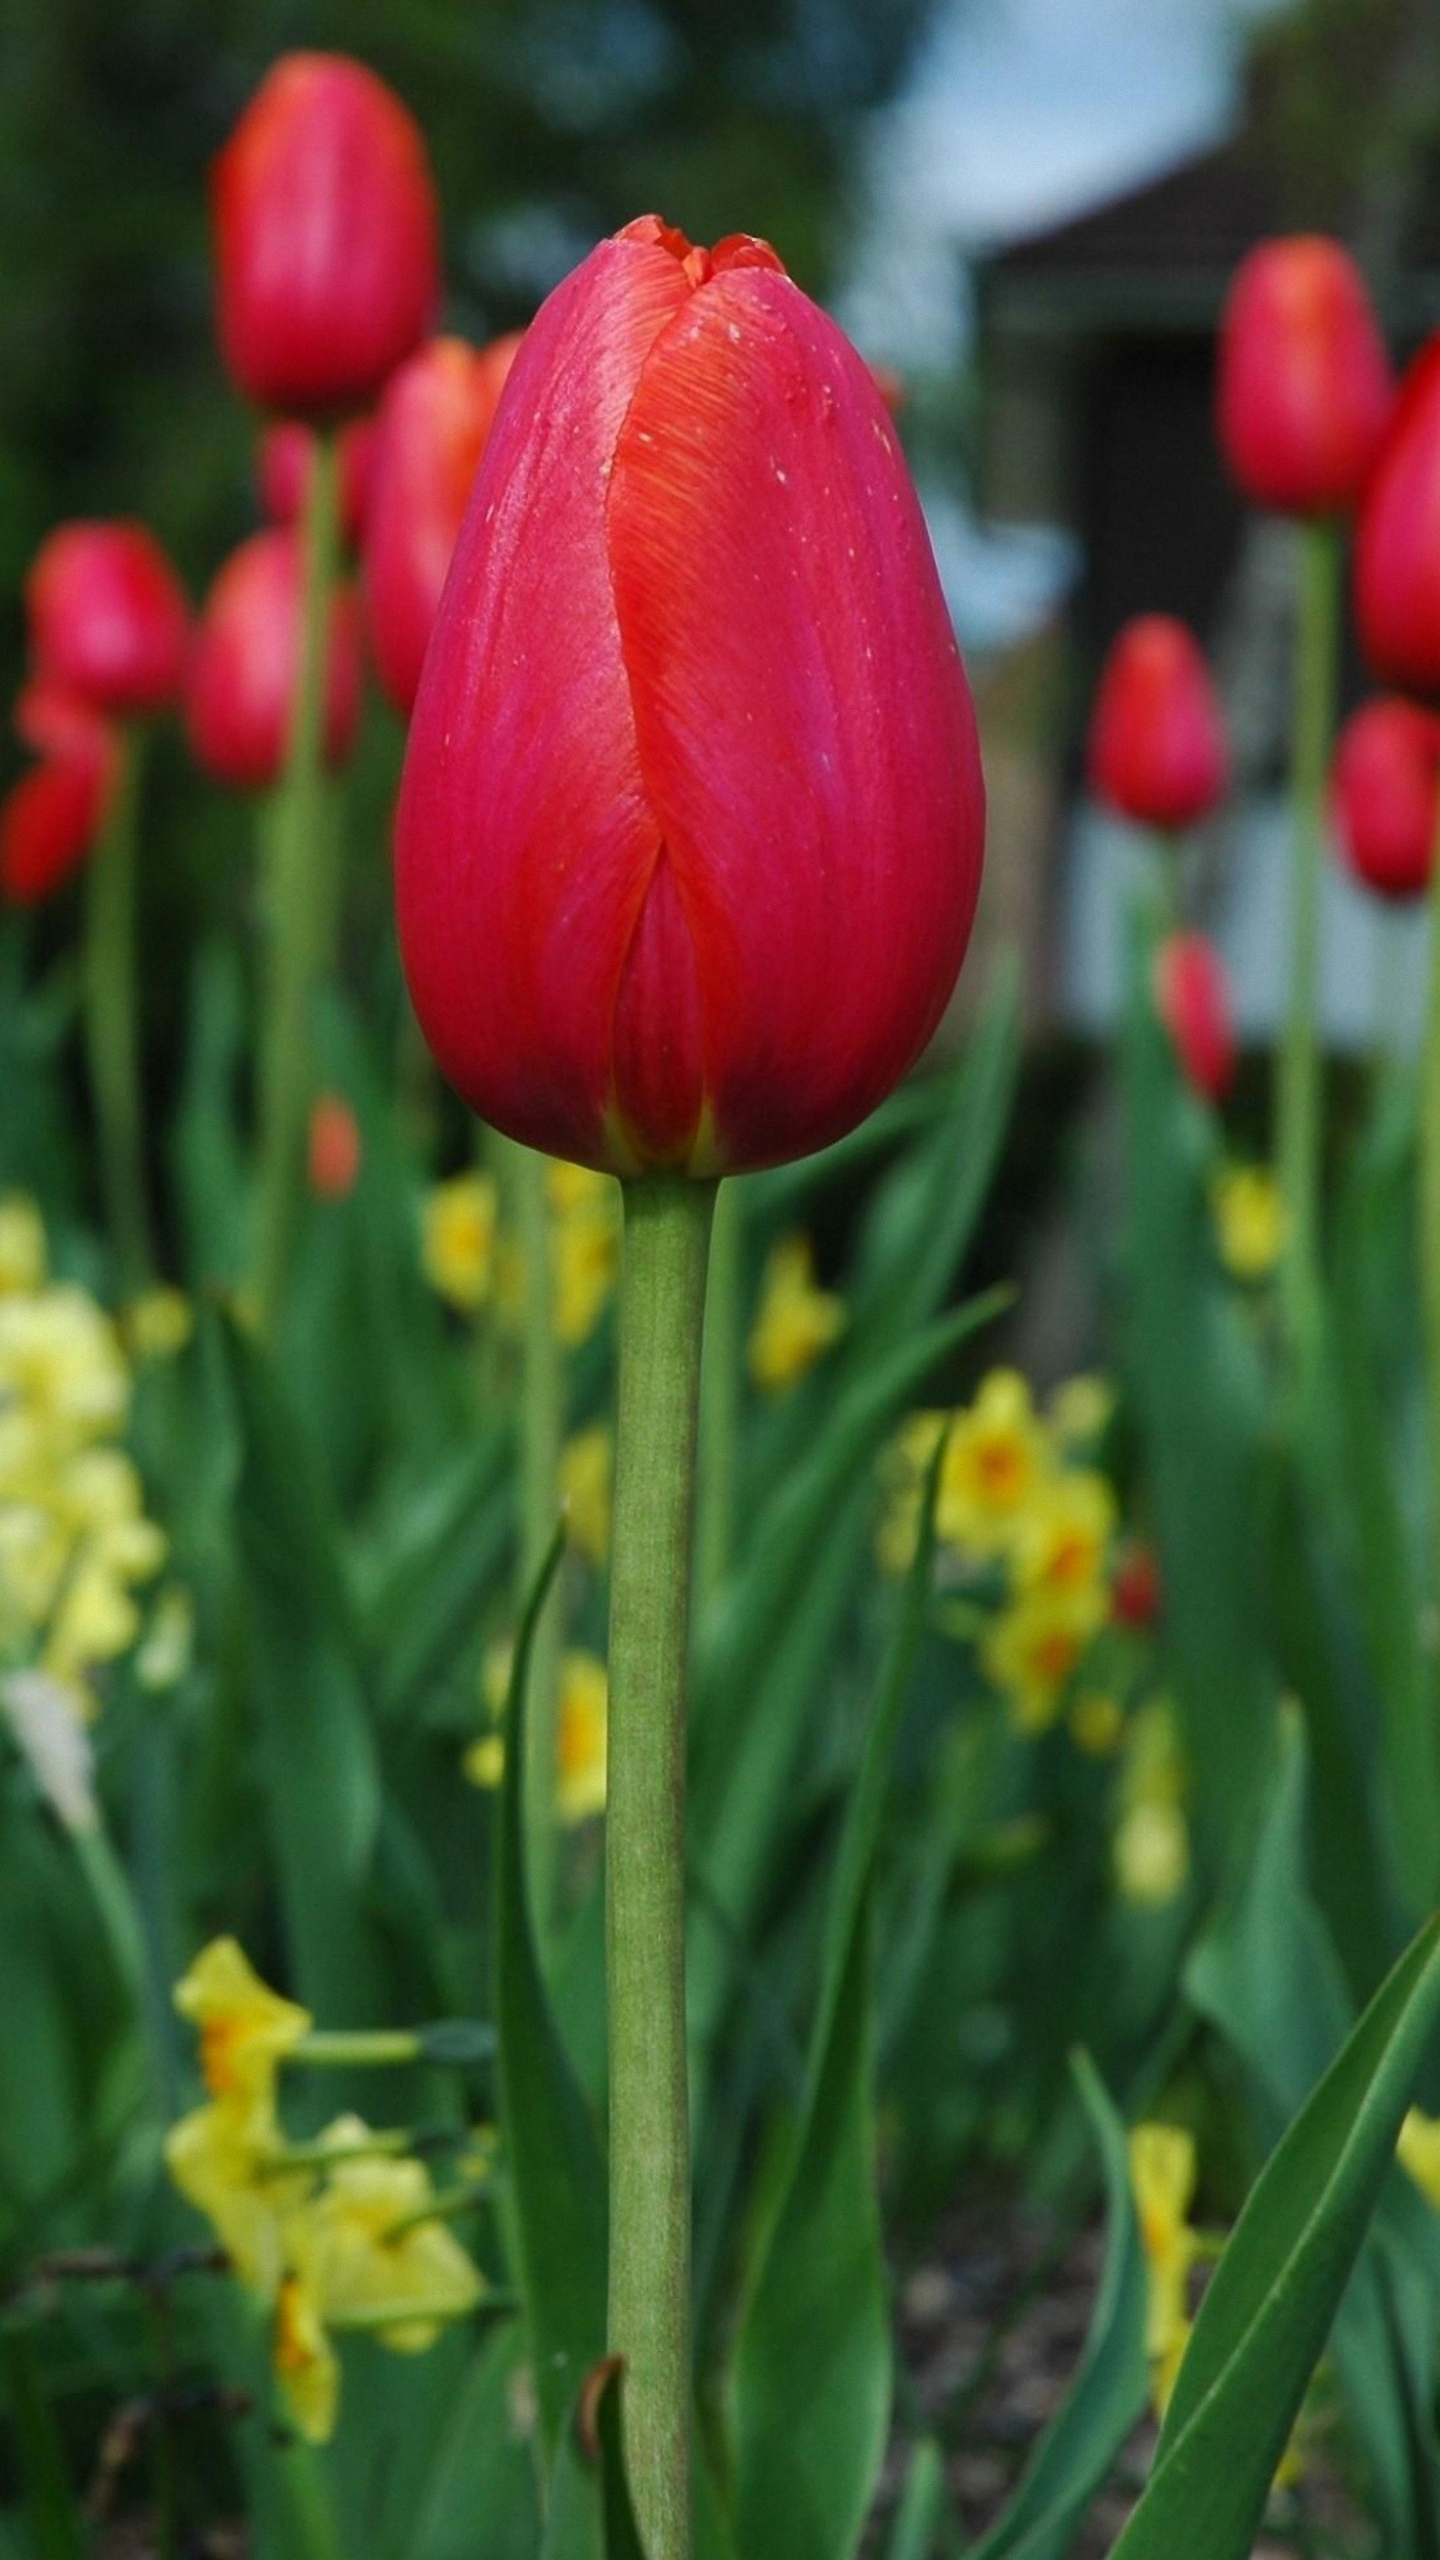 Red Tulip Hd Wallpaper For Mobile